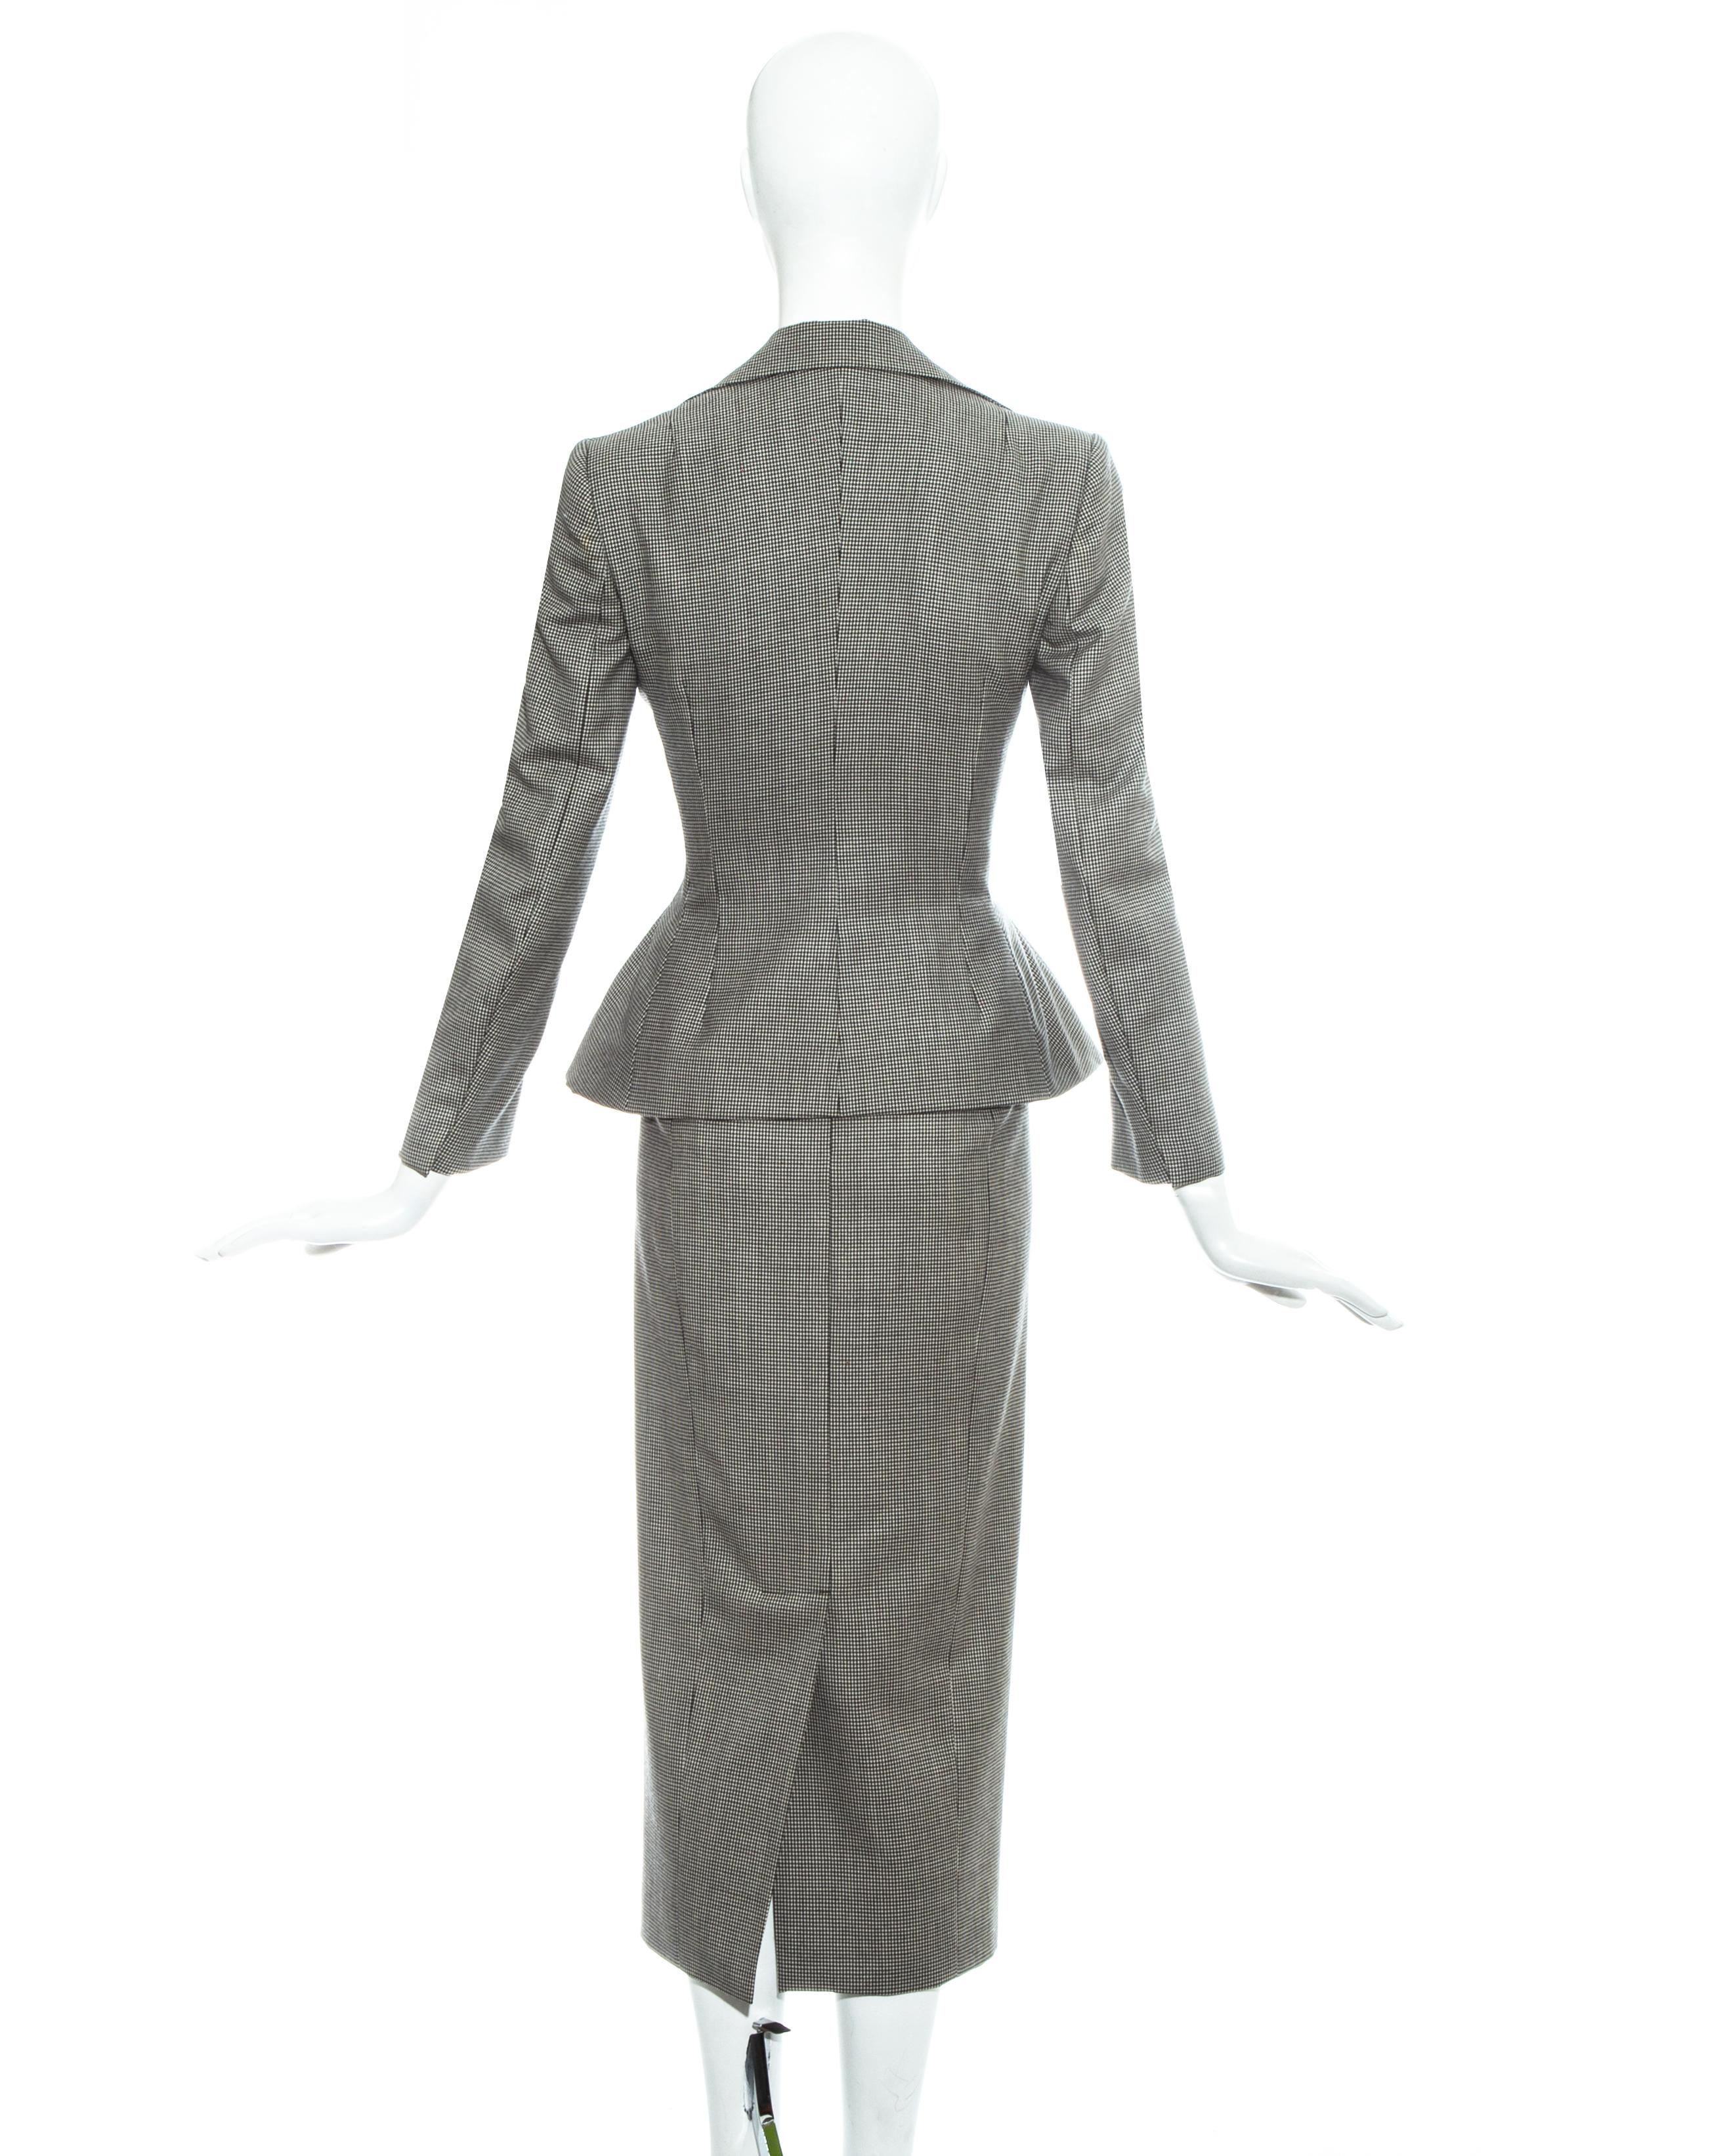 John Galliano hounds tooth check wool skirt suit, ss 1995 5